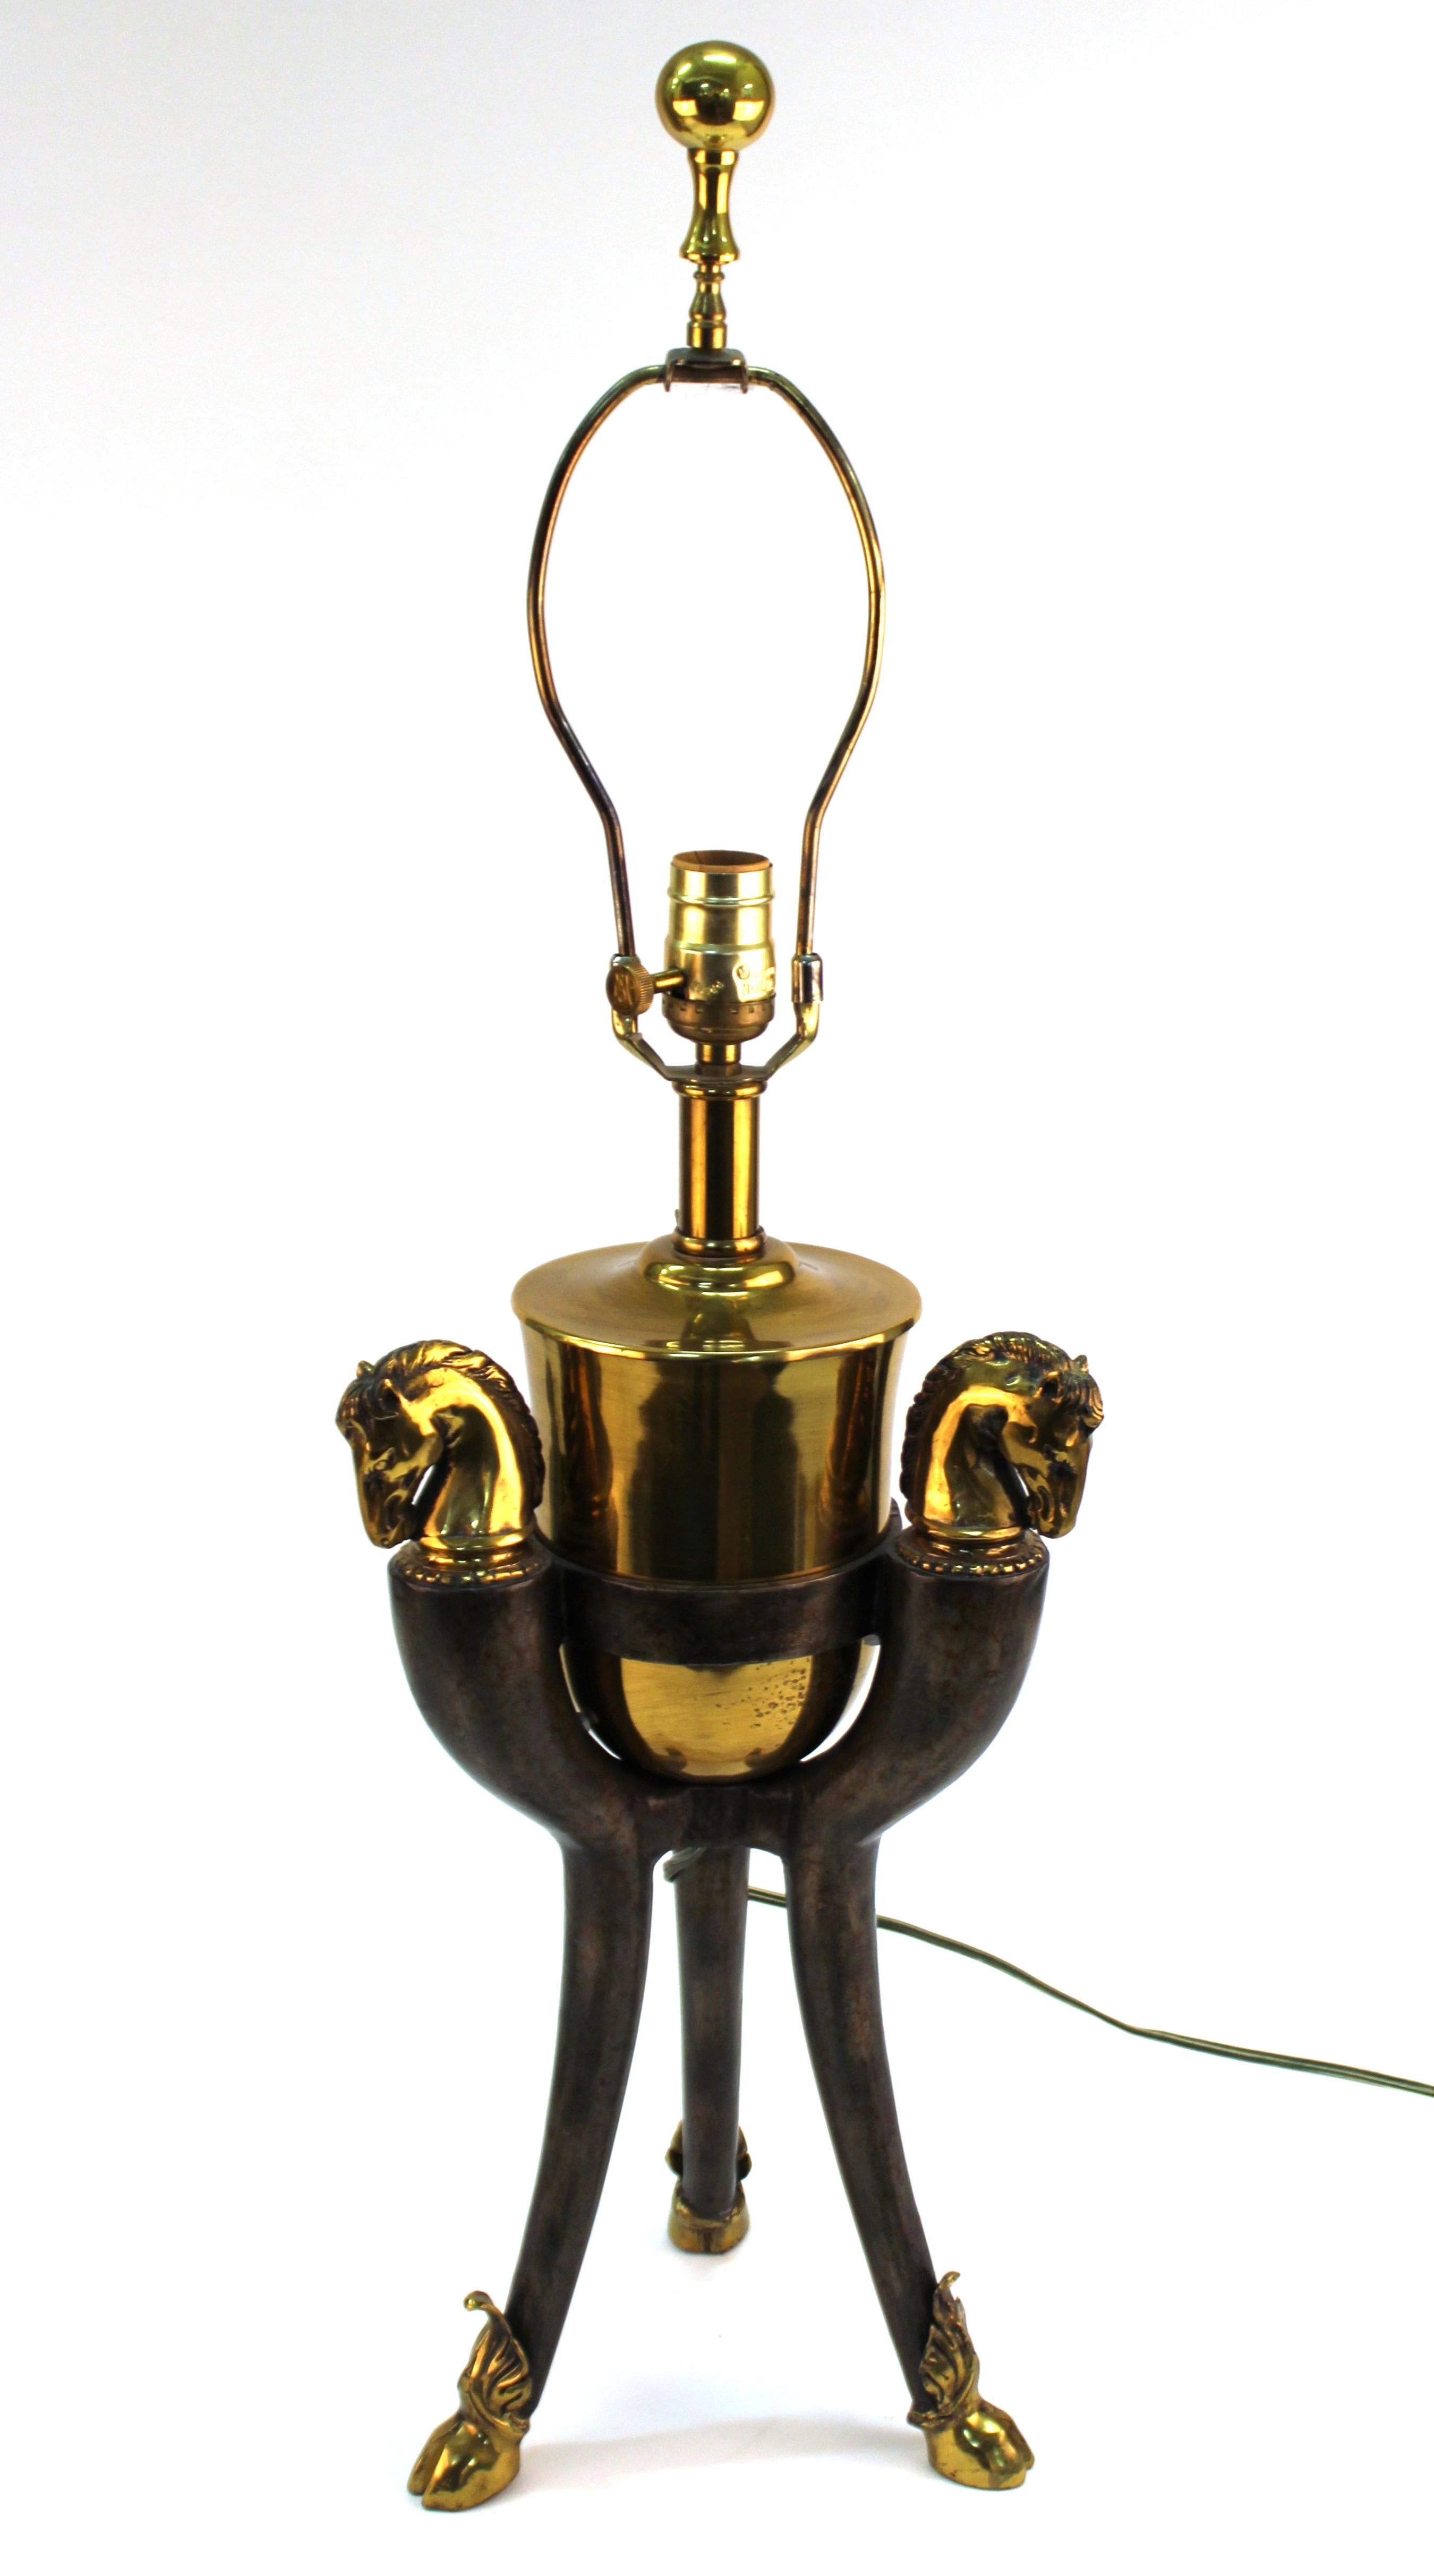 Modern pair of equestrian themed table lamps with horse heads and tripod bases with hoofed legs. The pair was likely made during the late 20th century and is in great vintage condition with some age-related wear to the bases.